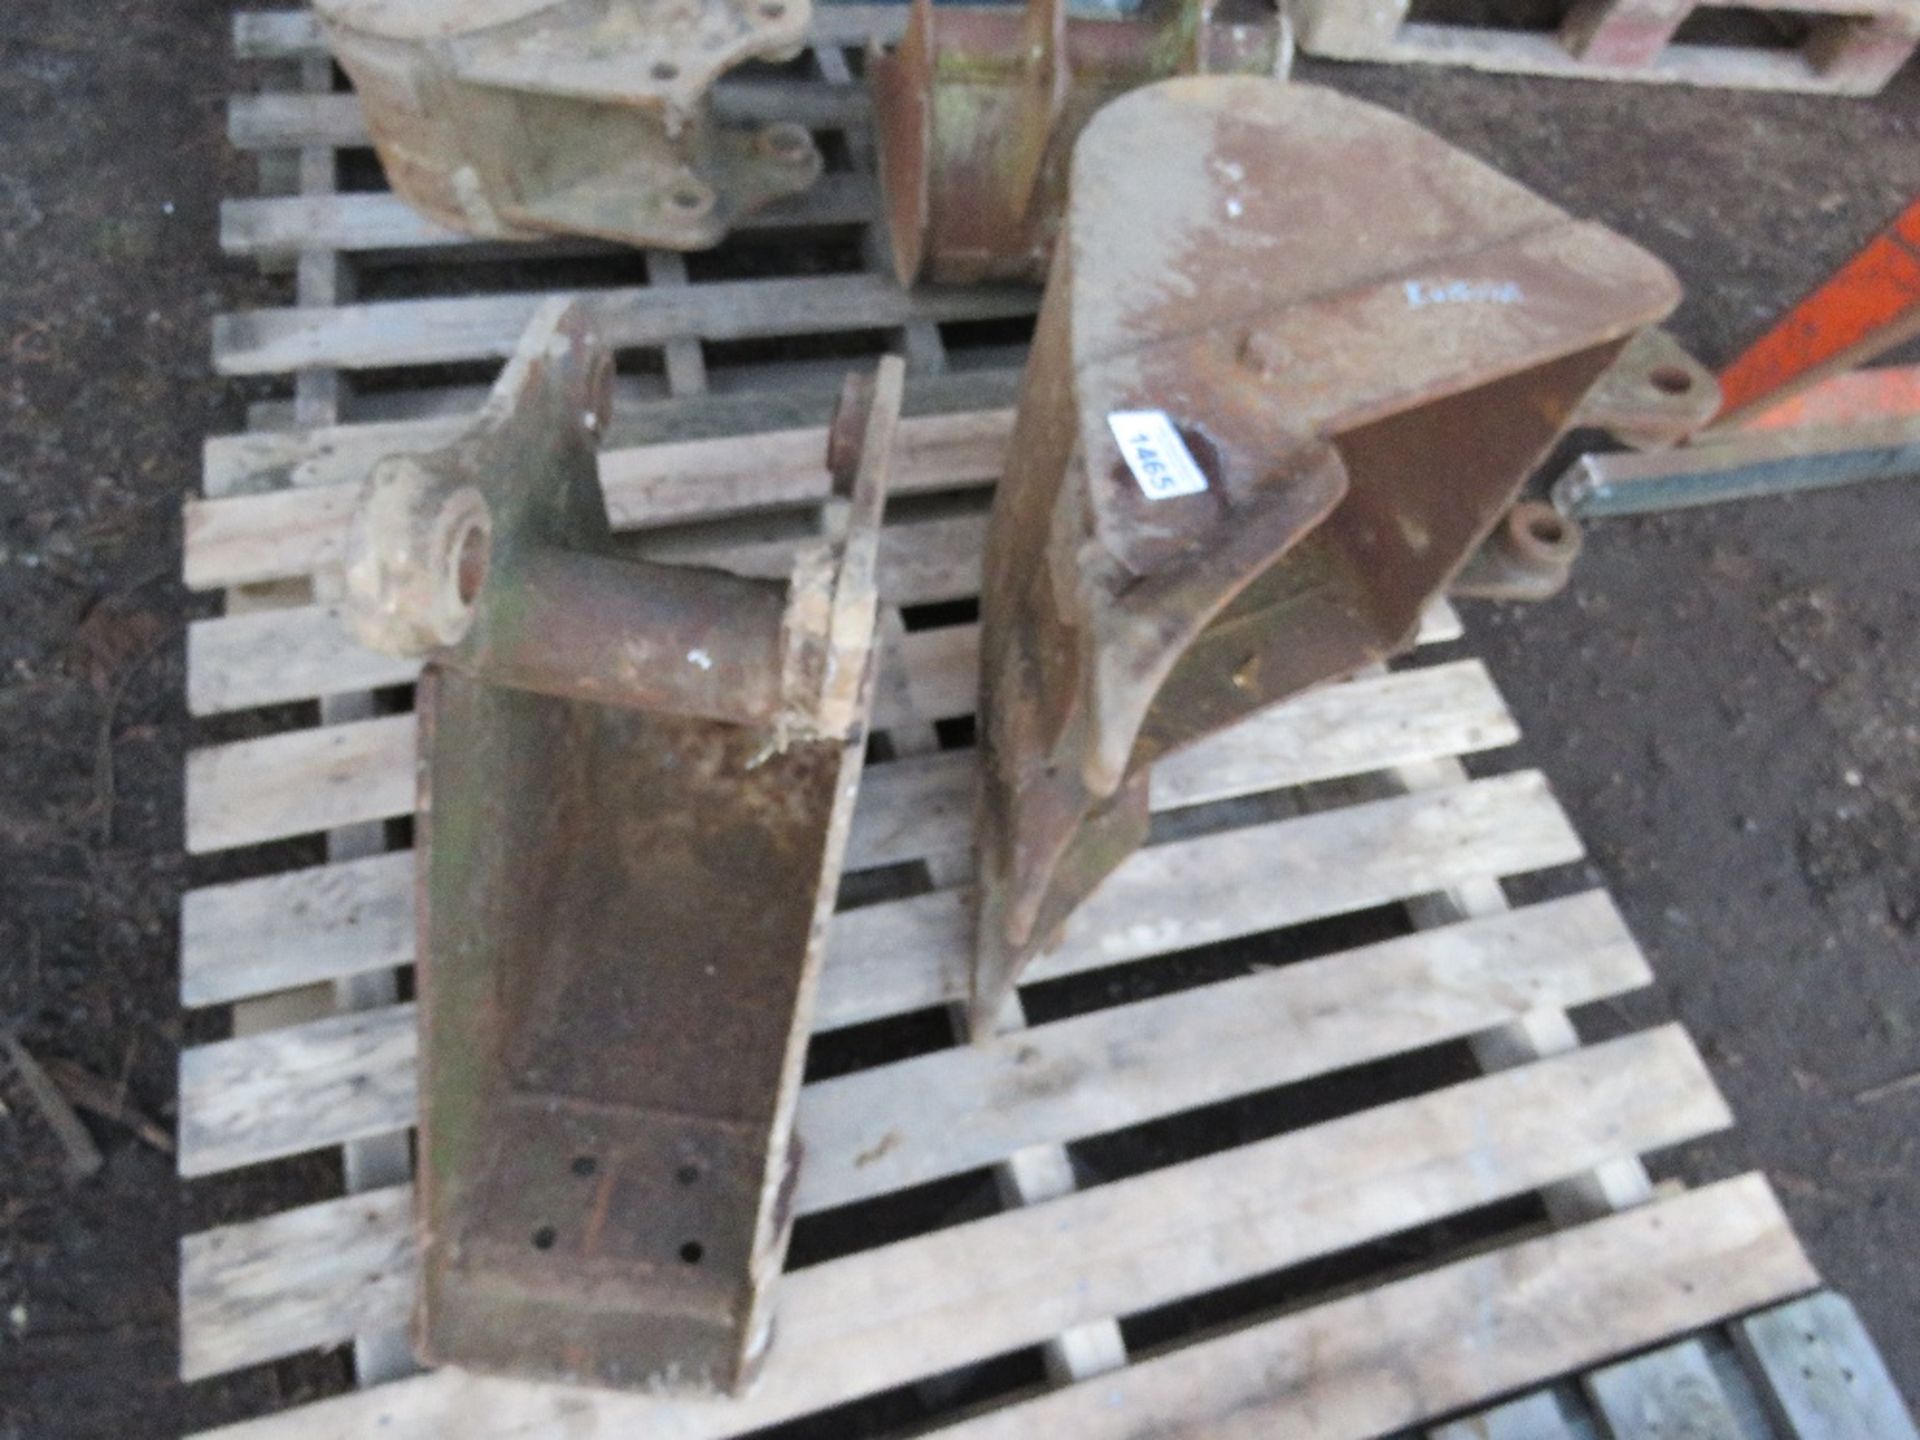 2 X MINI EXCAVATOR BUCKETS: KUBOTA 2.8TONNE, 35MM PINS, 18" AND 10" APPROX. THIS LOT IS SOLD UND